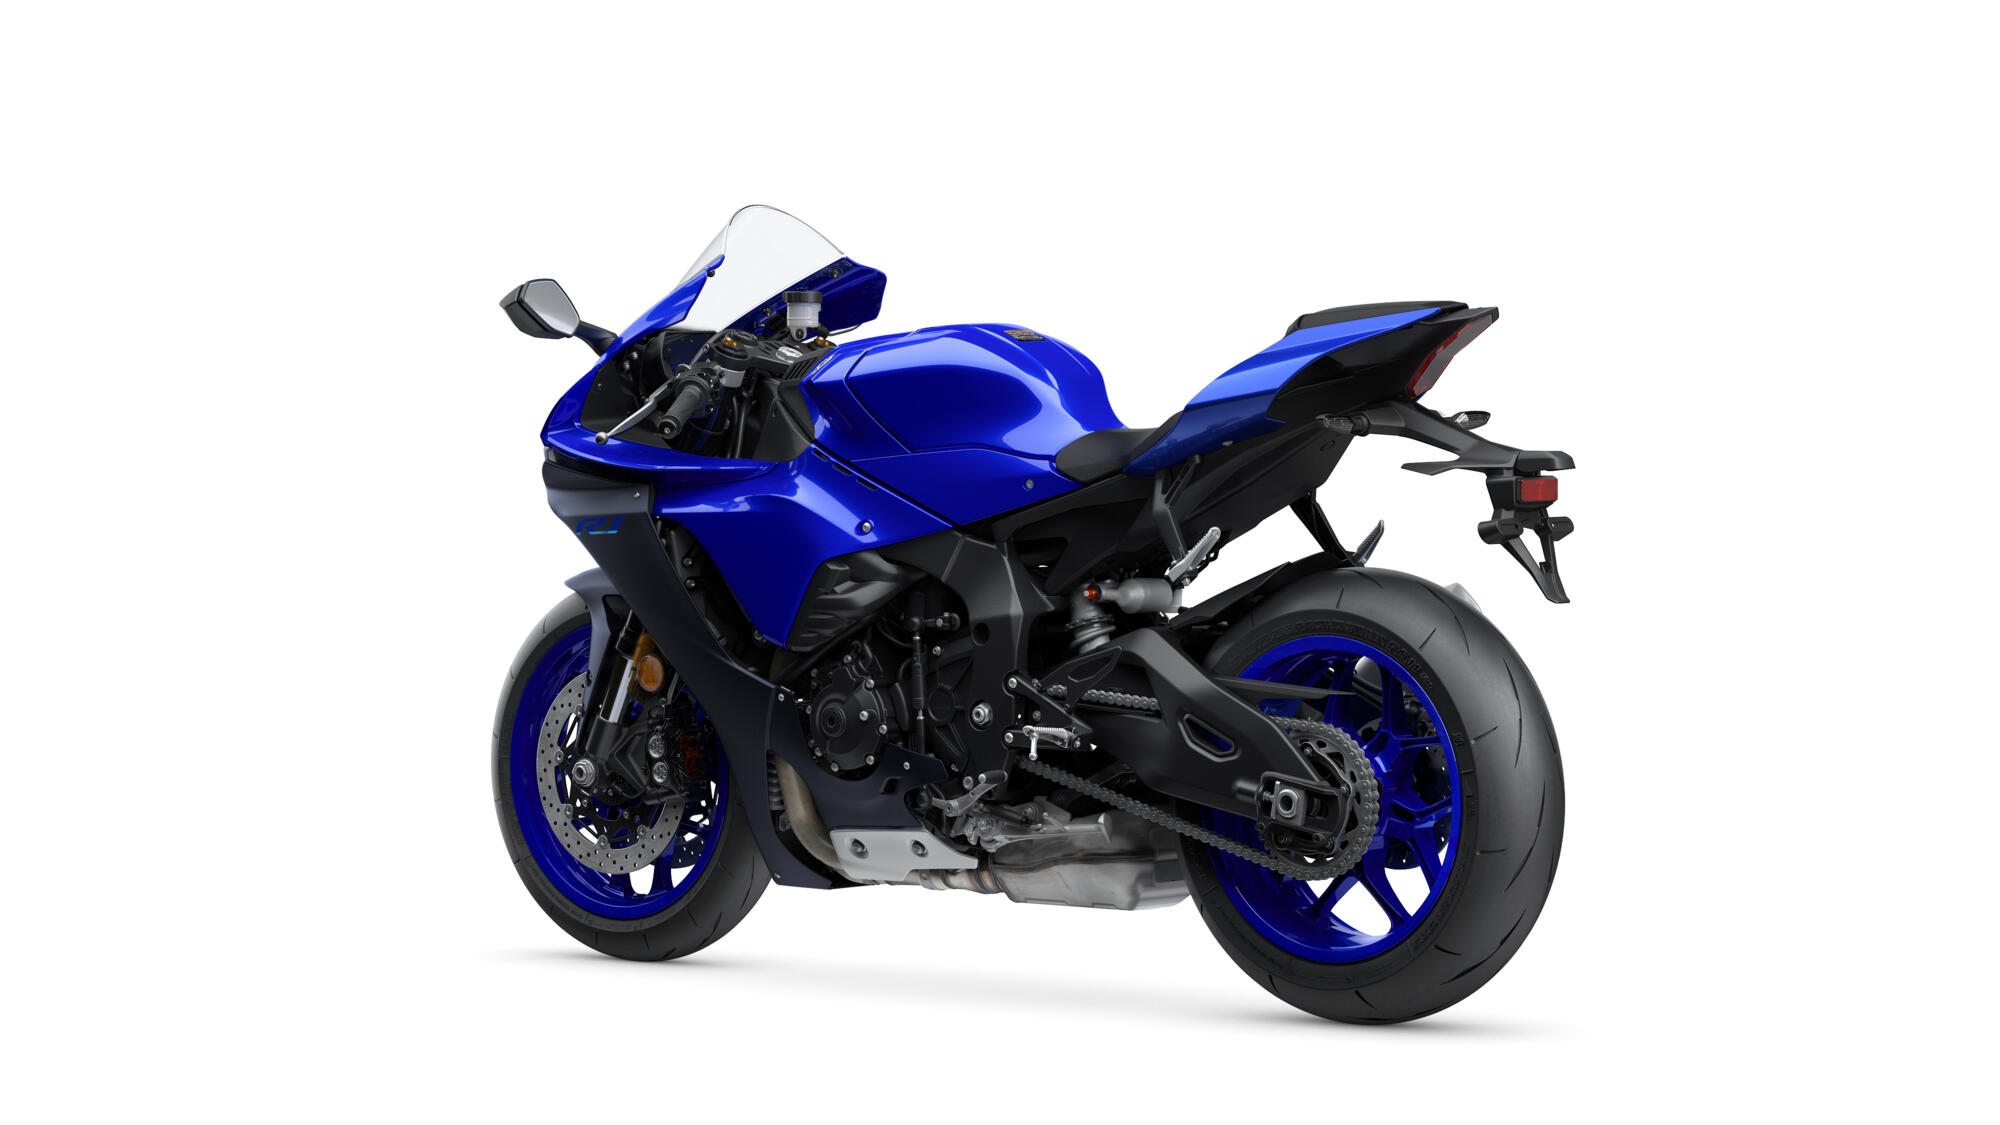 Yamaha R1: The superbike icon over the years